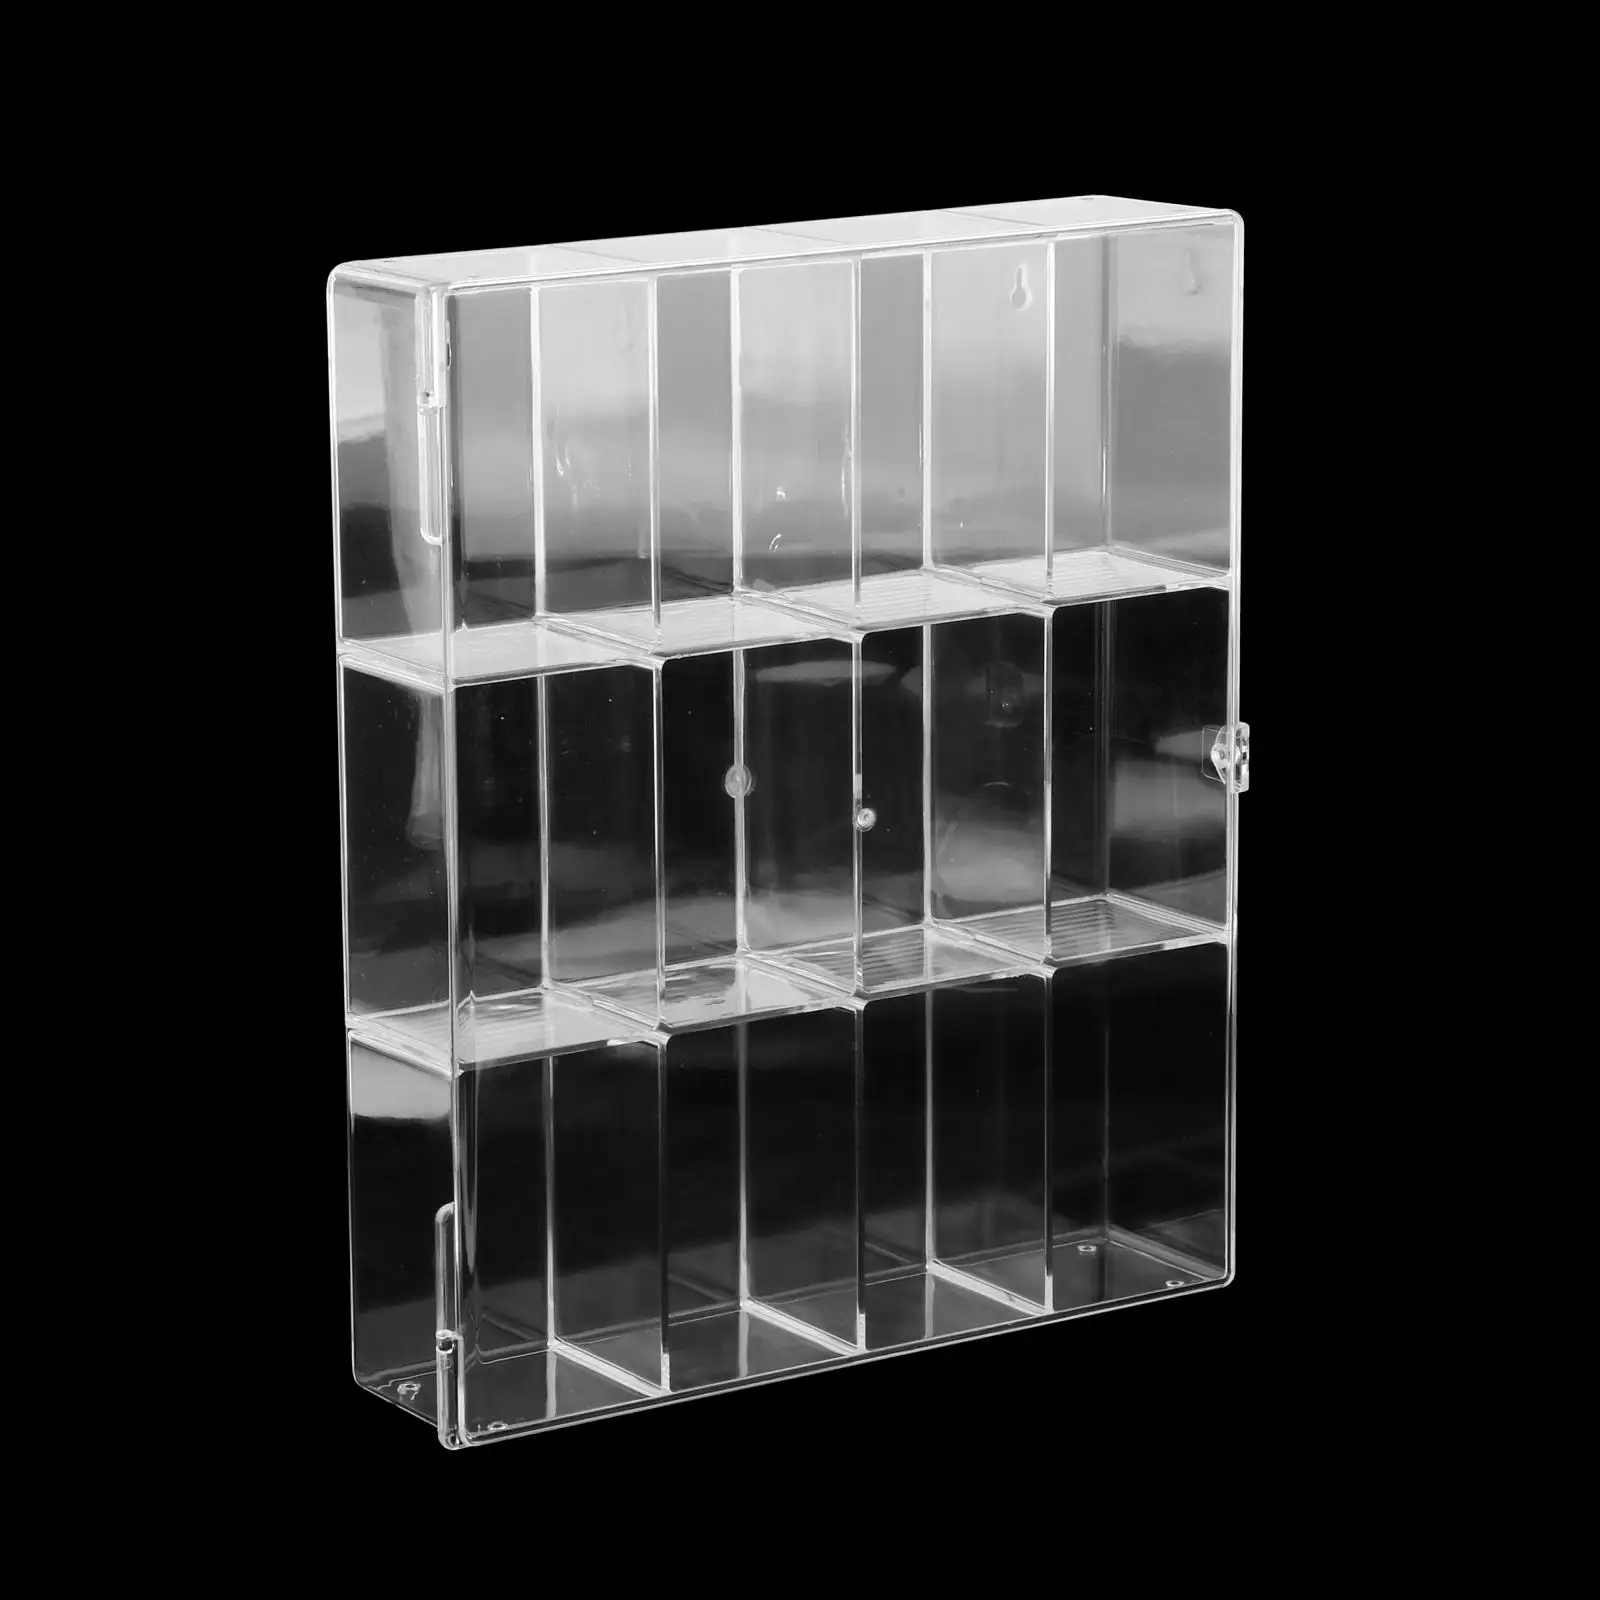 Details about   Acrylic Dustproof Box Display Case for GARAGE KIT Character Figures Model Decor 